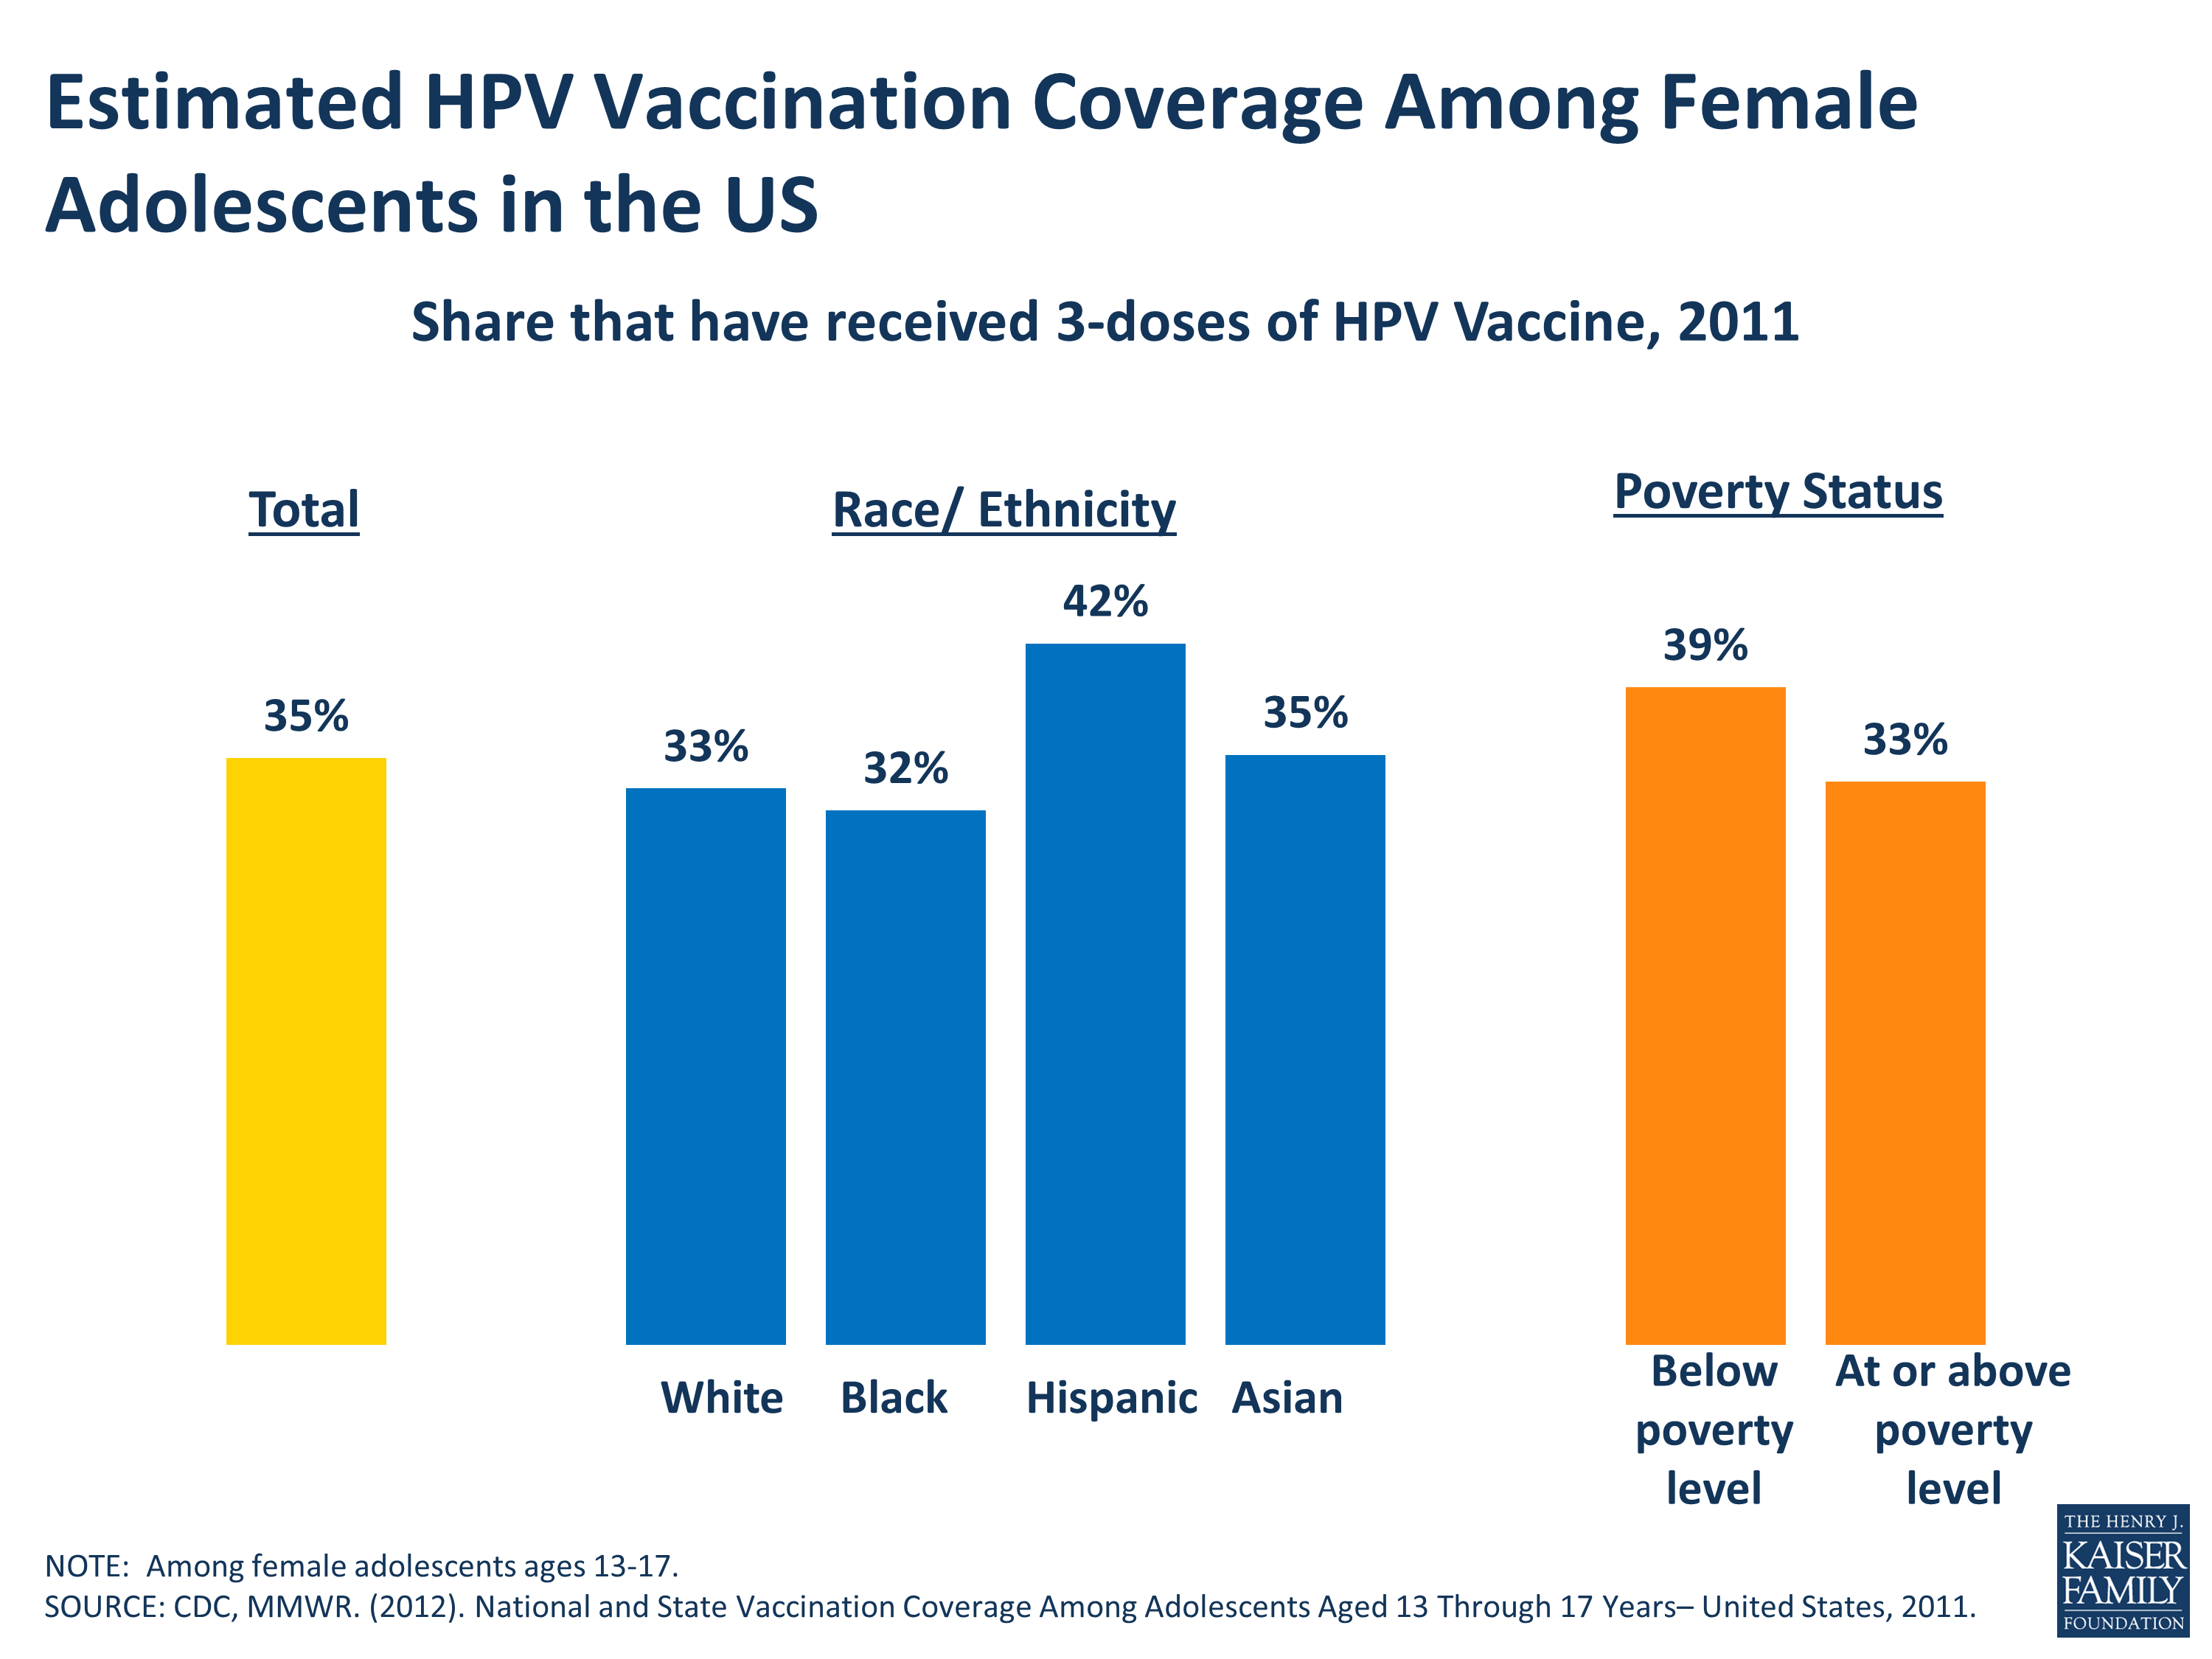 Availability of free or reduced-cost HPV vaccines